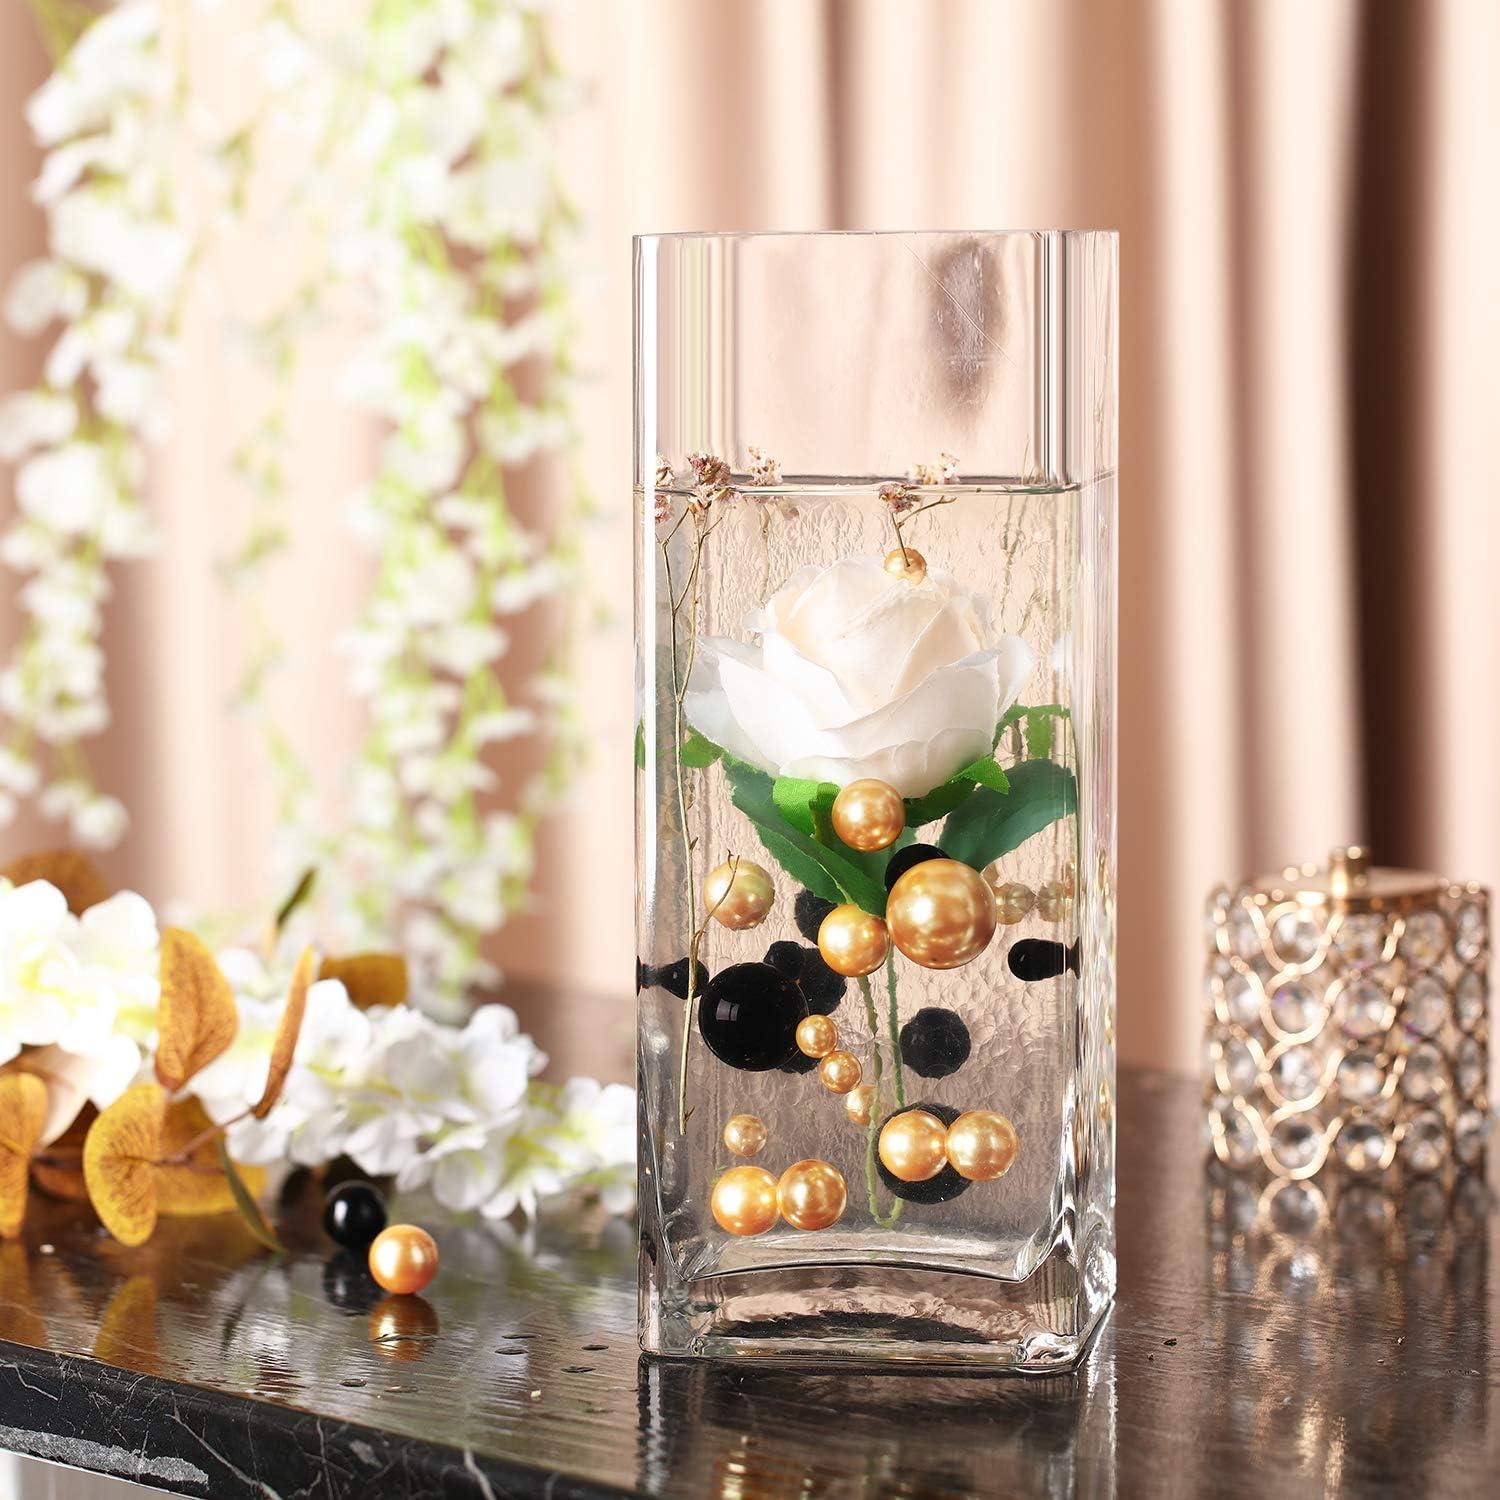 Floral Wedding Pearl Water Beads - Clear Gel Balls for Vase Or